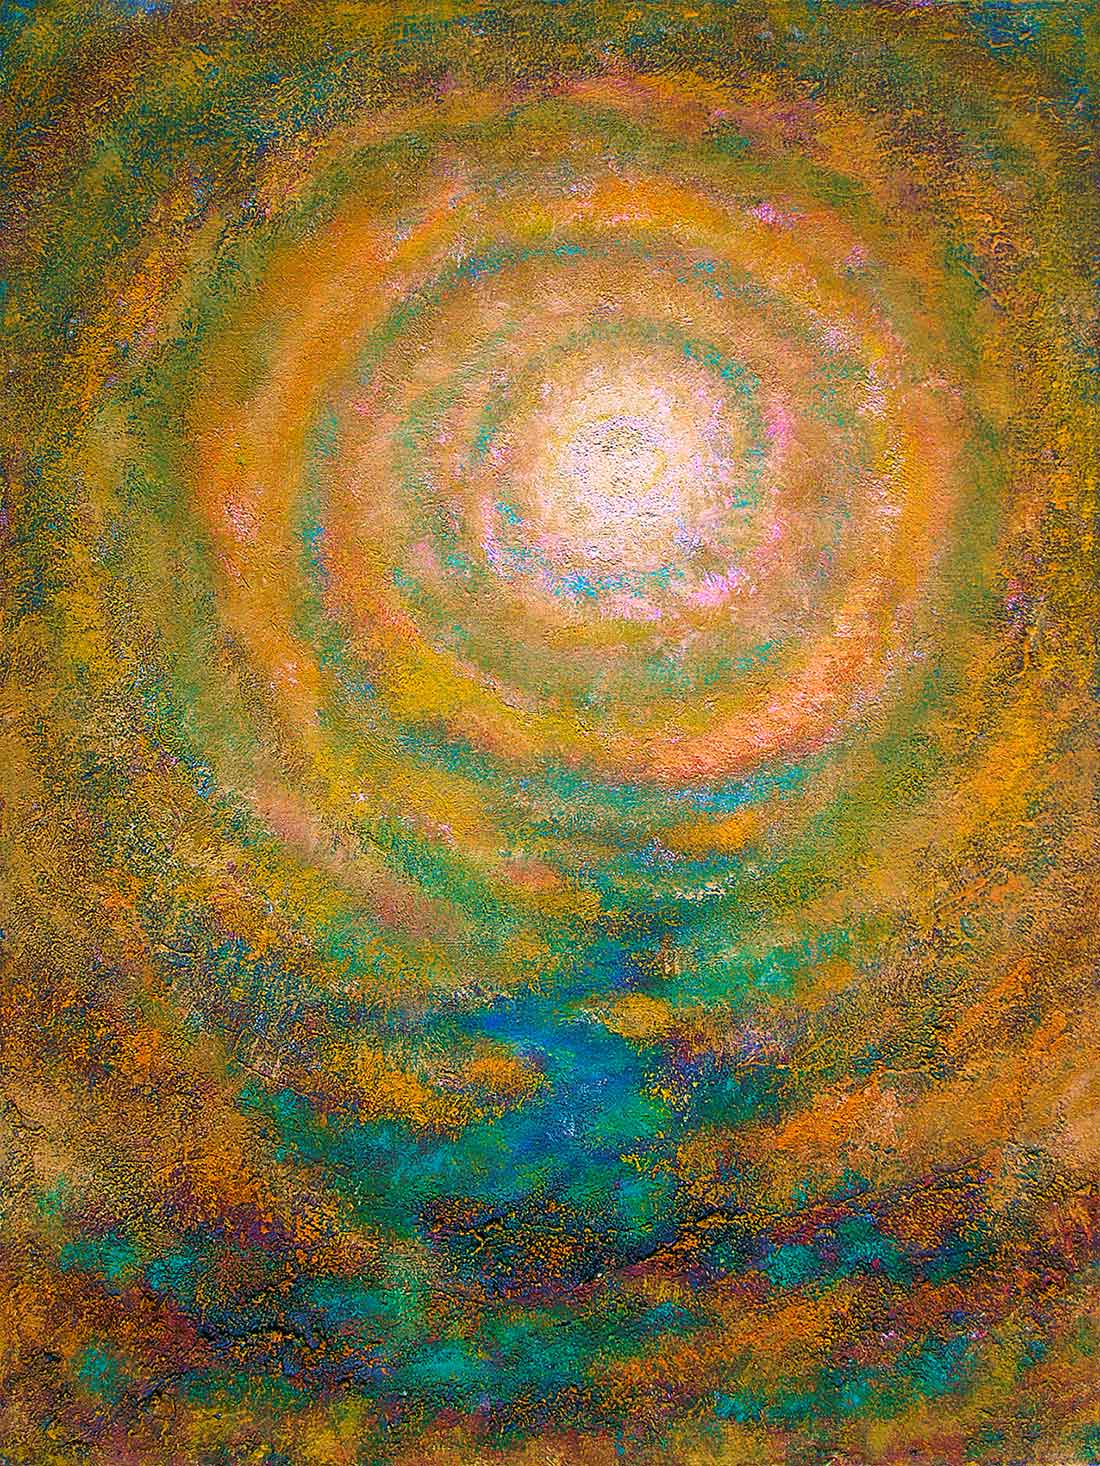 Oil painting 'Aura of the Sun' by Wiesław Sadurski, showcasing golden rings amidst green landscapes encircling a sun motif.